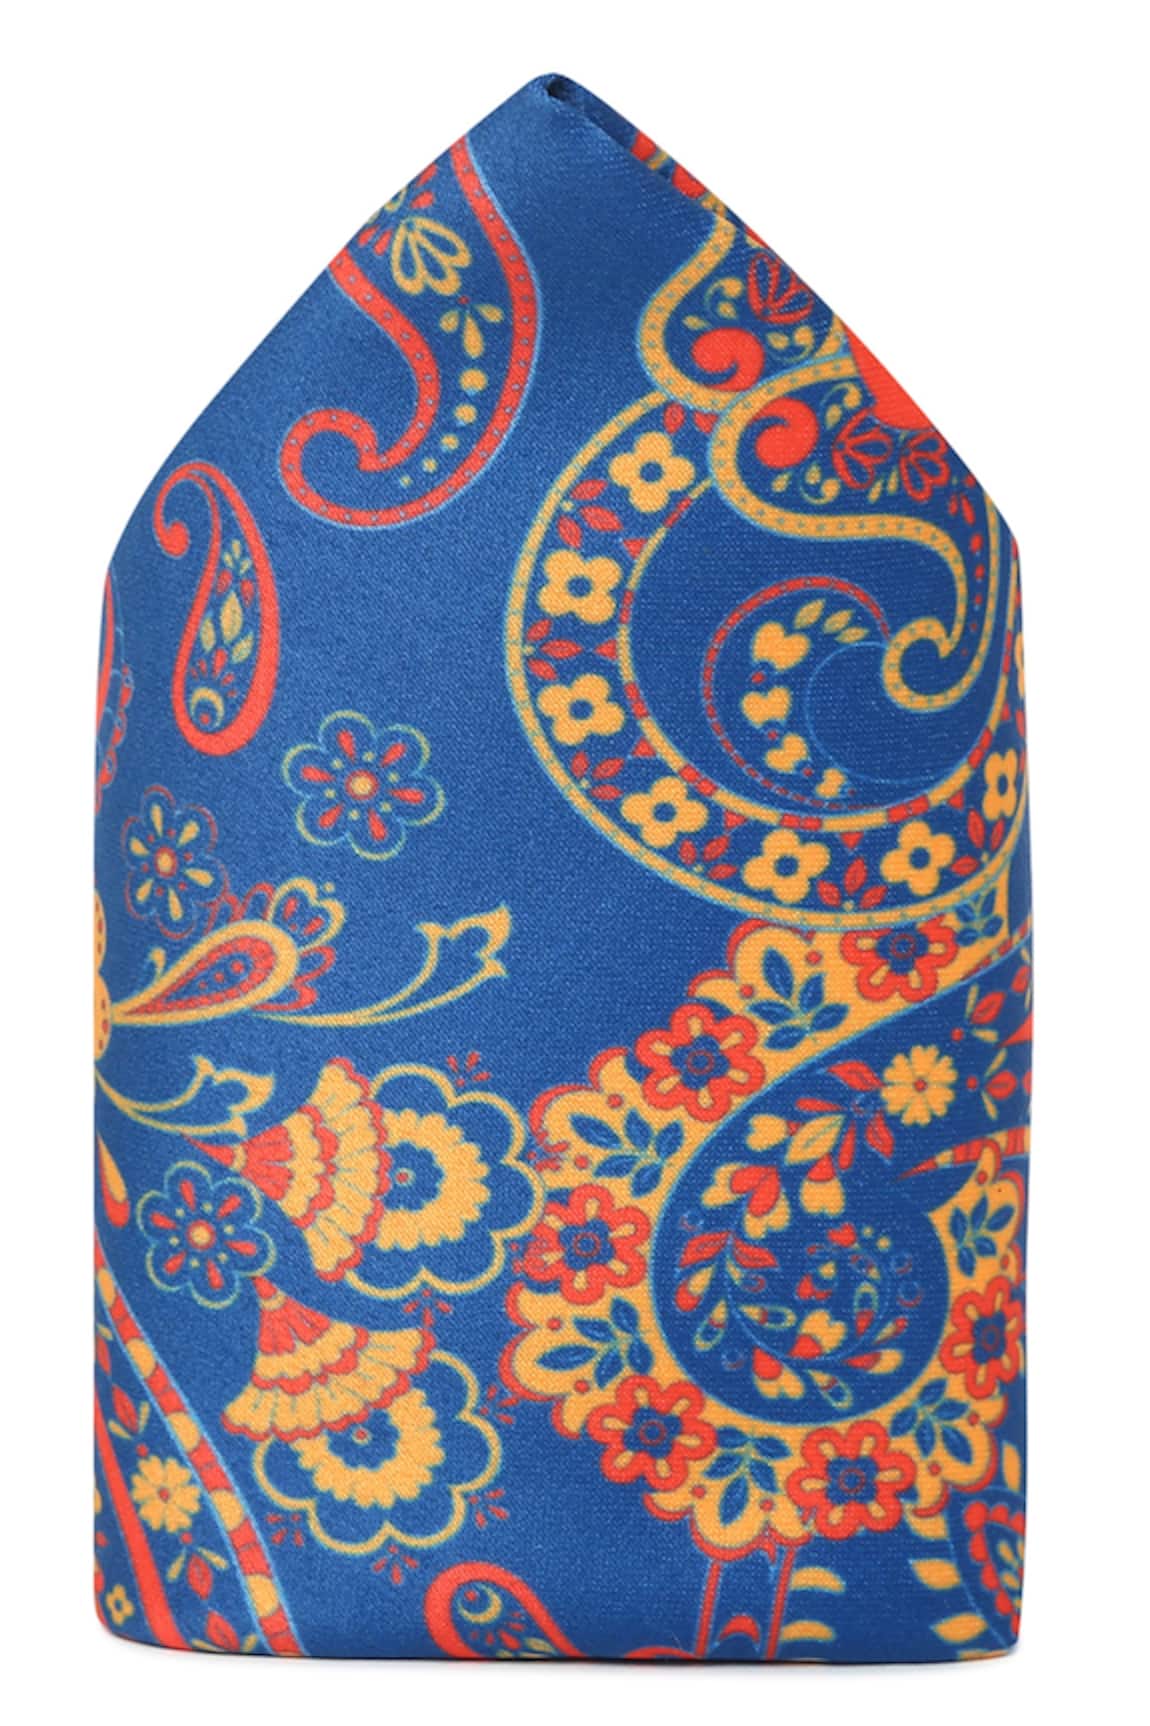 Tossido Floral & Paisley Print Pocket Square